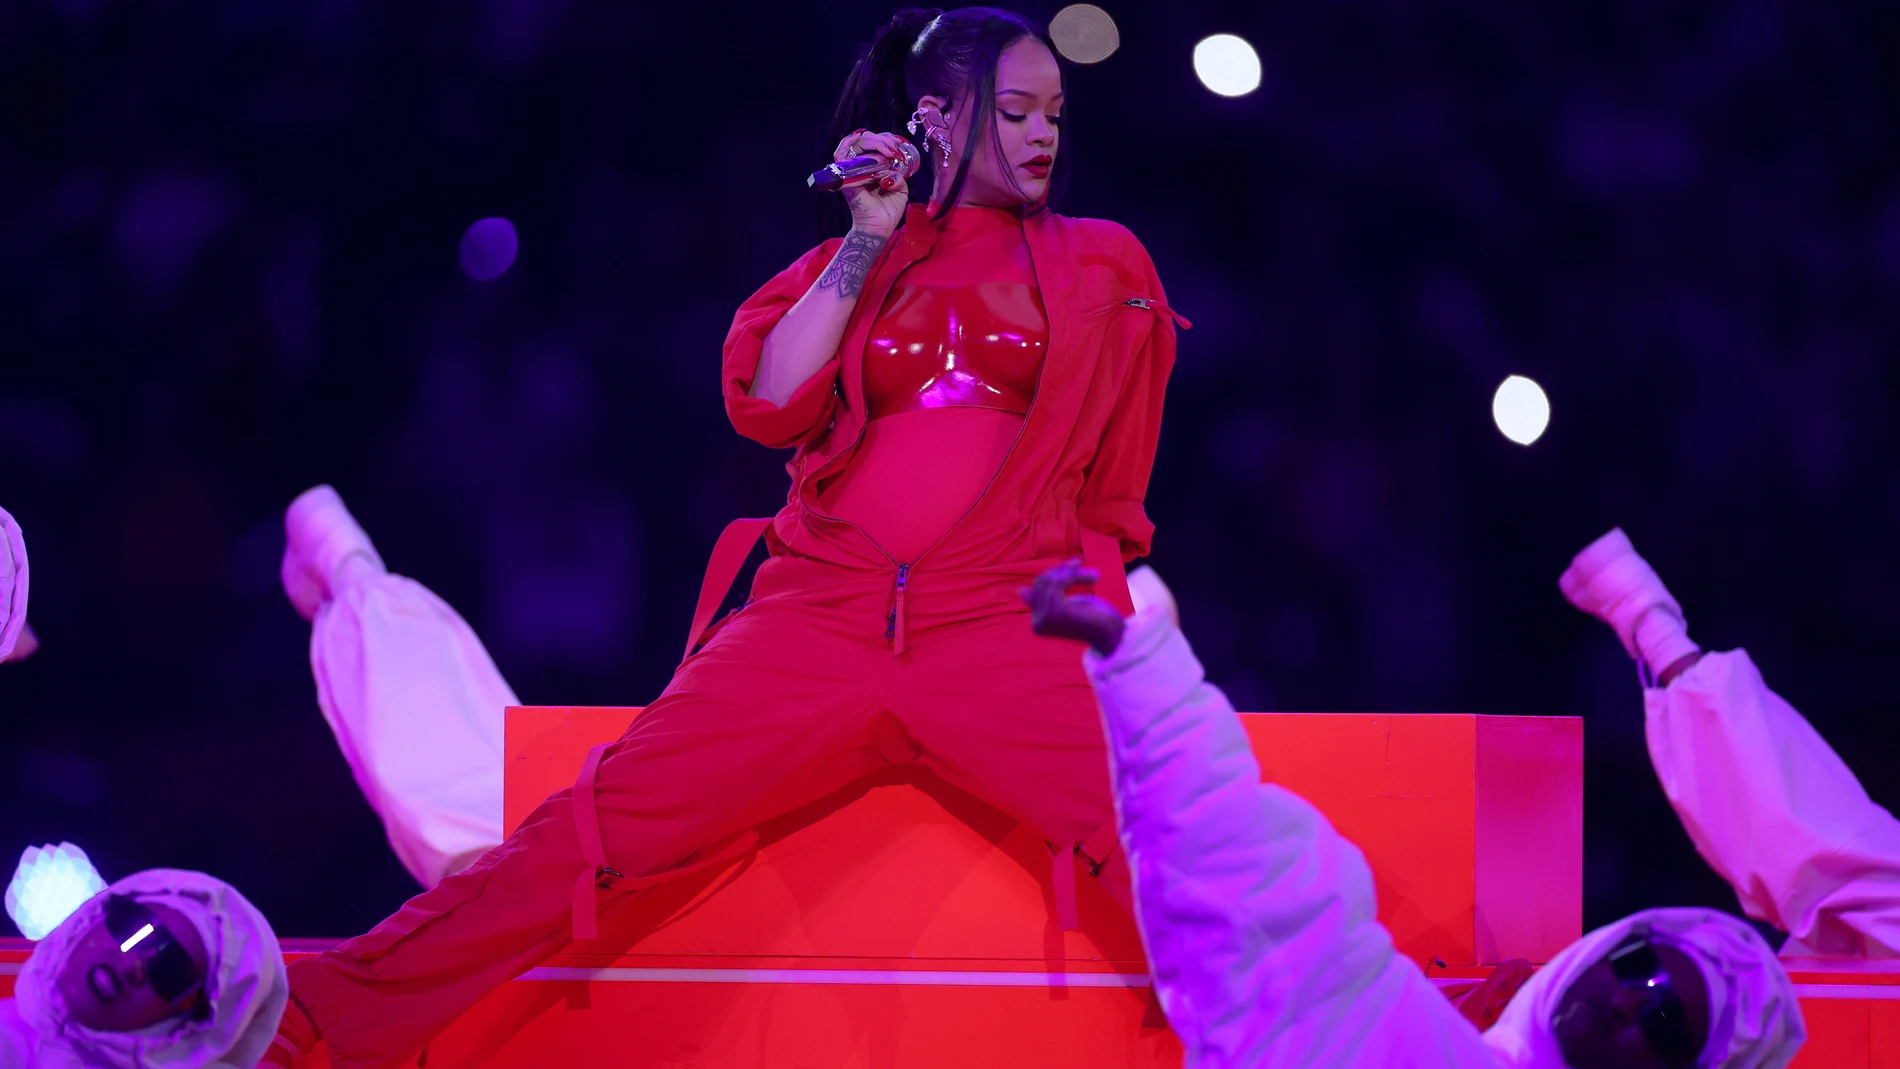 Glendale (United States), 12/02/2023.- Barbadian singer Rihanna performs during halftime of Super Bowl LVII between the AFC champion Kansas City Chiefs and the NFC champion Philadelphia Eagles at State Farm Stadium in Glendale, Arizona, 12 February 2023. The annual Super Bowl is the Championship game of the NFL between the AFC Champion and the NFC Champion and has been held every year since January of 1967. (Estados Unidos, Filadelfia) EFE/EPA/CAROLINE BREHMAN 